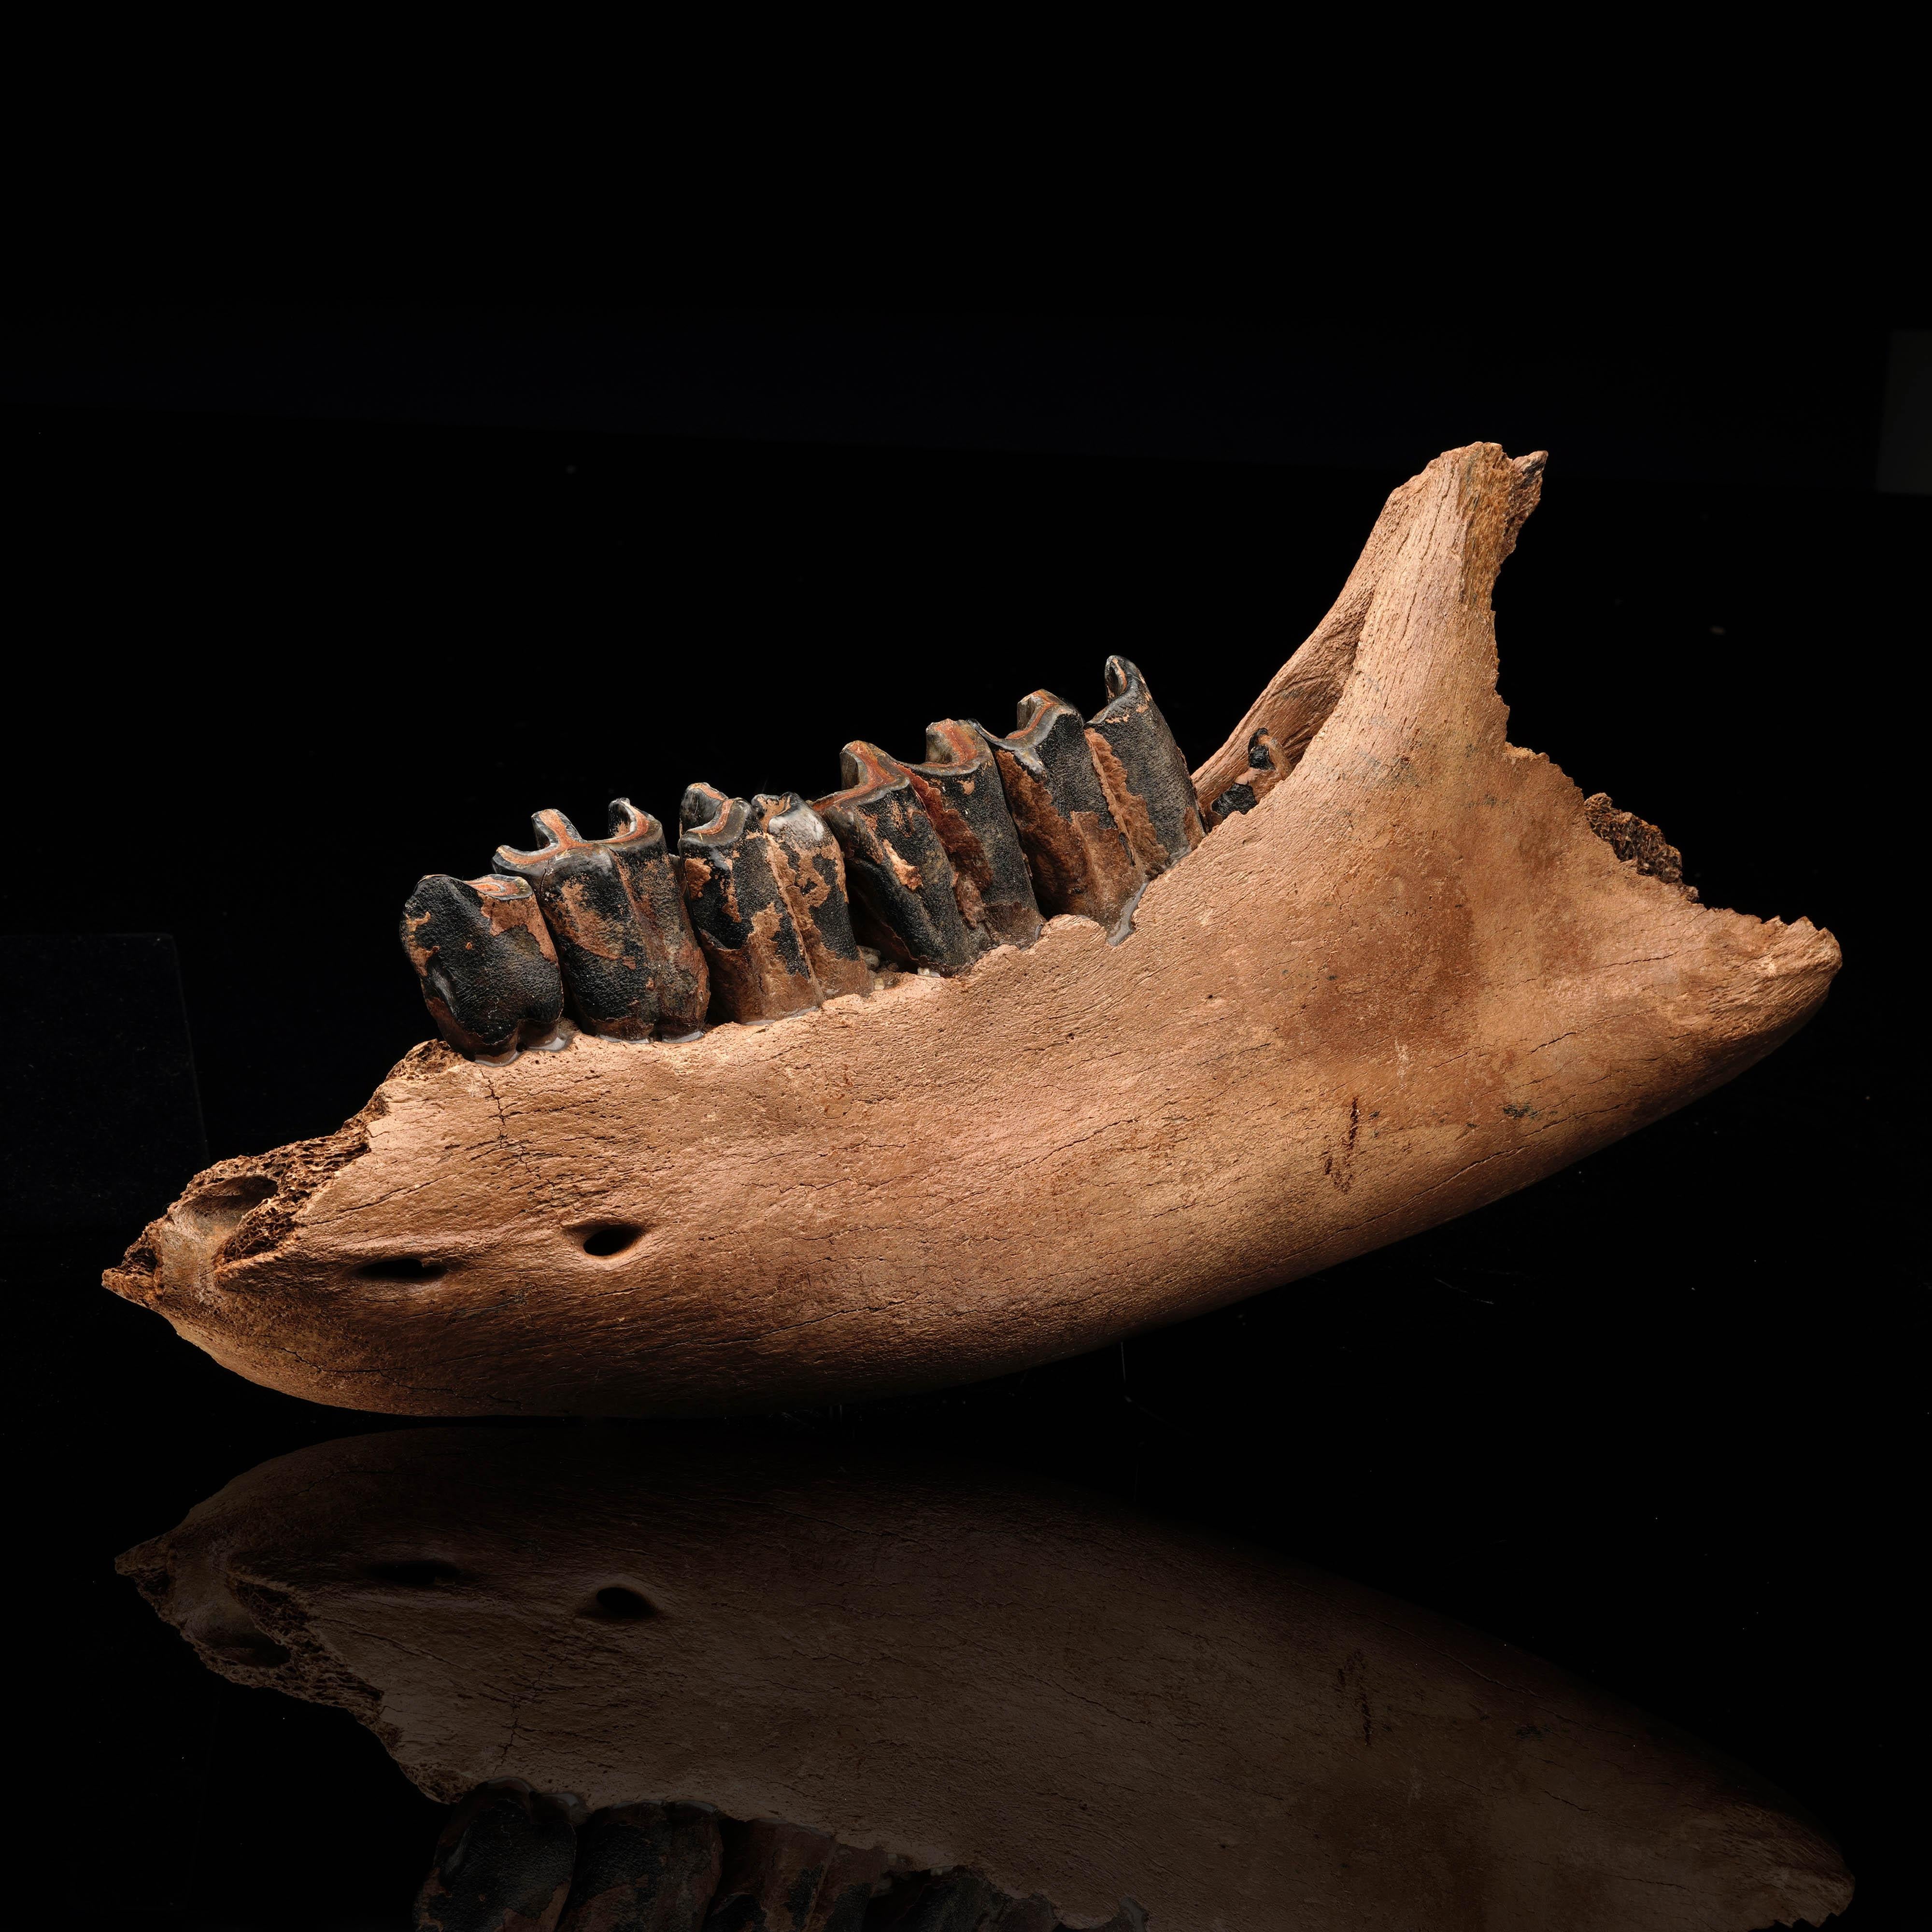 This is the intact and un-repaired fossilized lower jaw and teeth of a genuine woolly rhinoceros. An extinct mammal with similarities to the woolly mammoth and two large facial horns made of keratin, the woolly rhinoceros walked the earth in